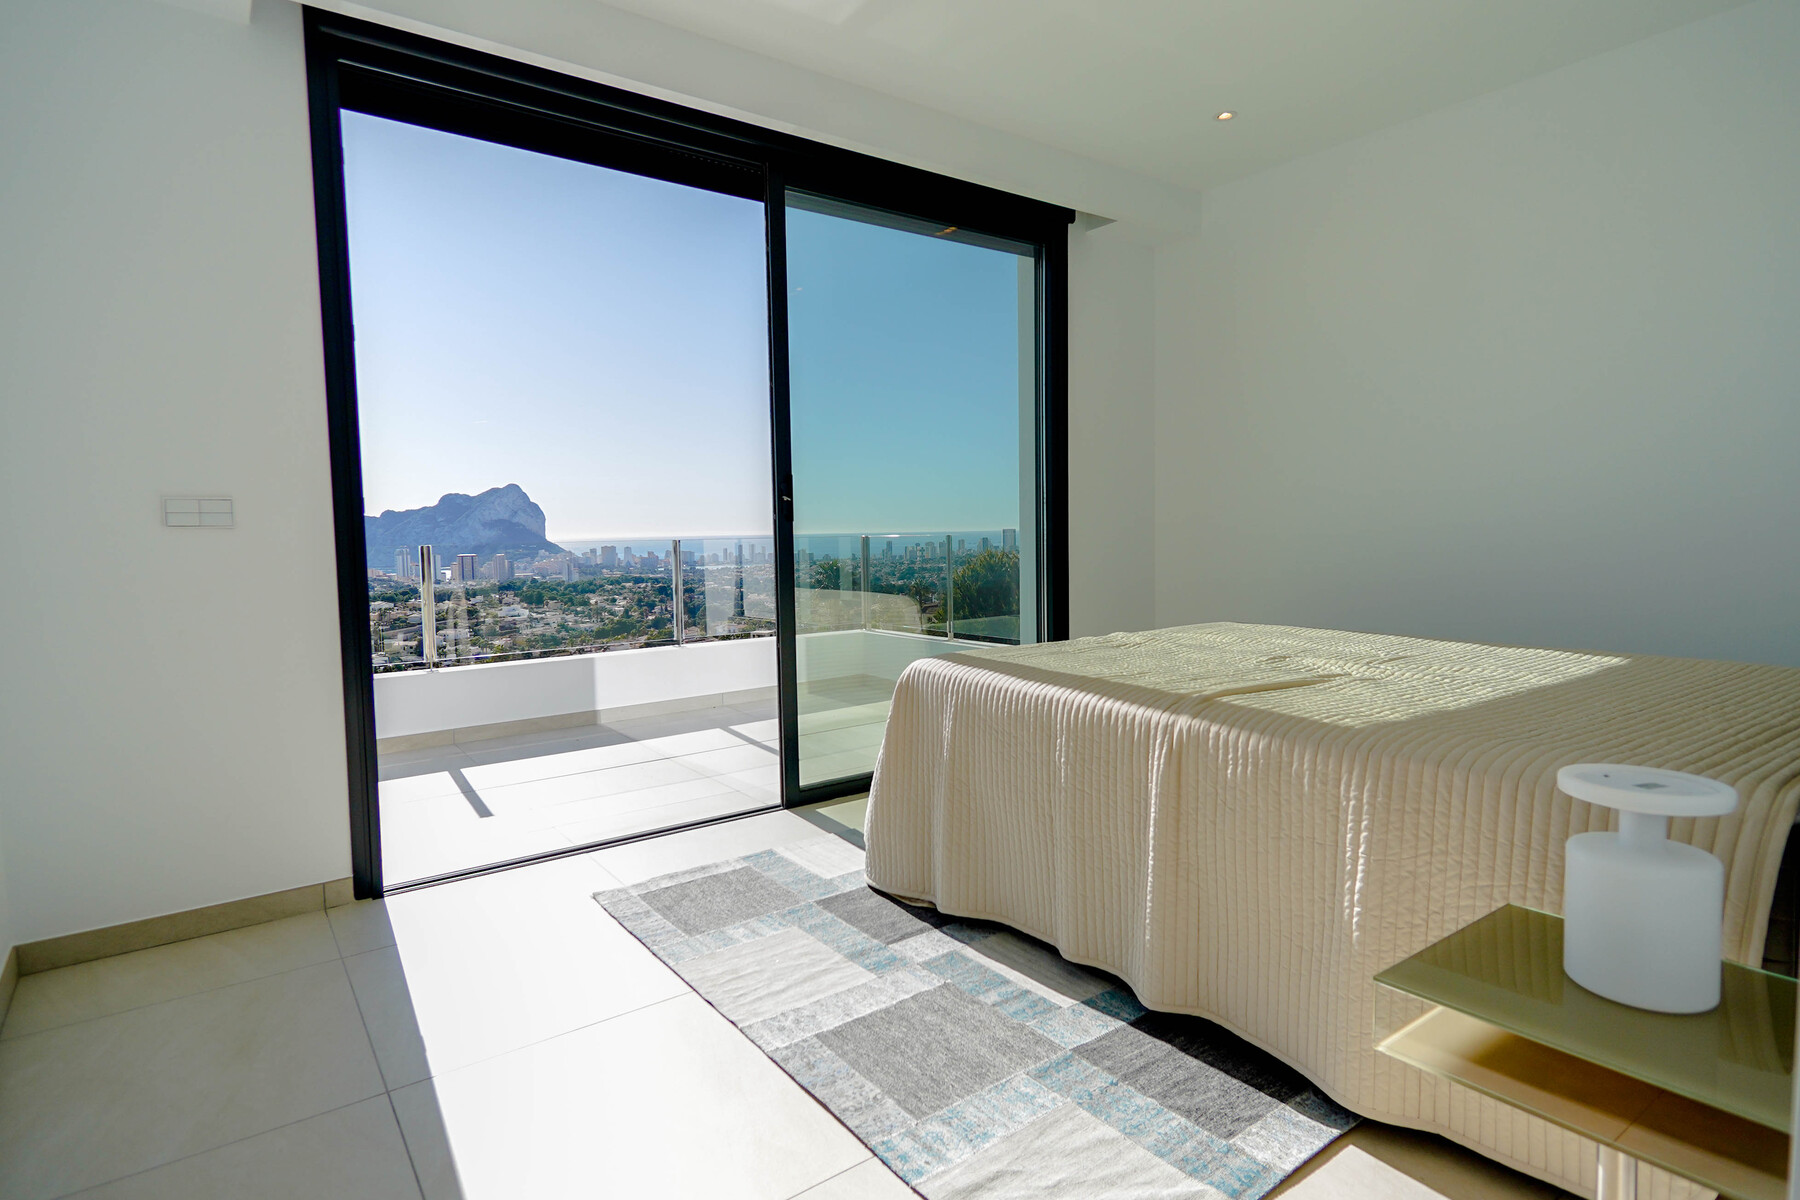 MODERN MEDITERRANEAN STYLE VILLA WITH SEA VIEWS IN CALPE | Built and Sold by GH Costa Blanca Real Estate